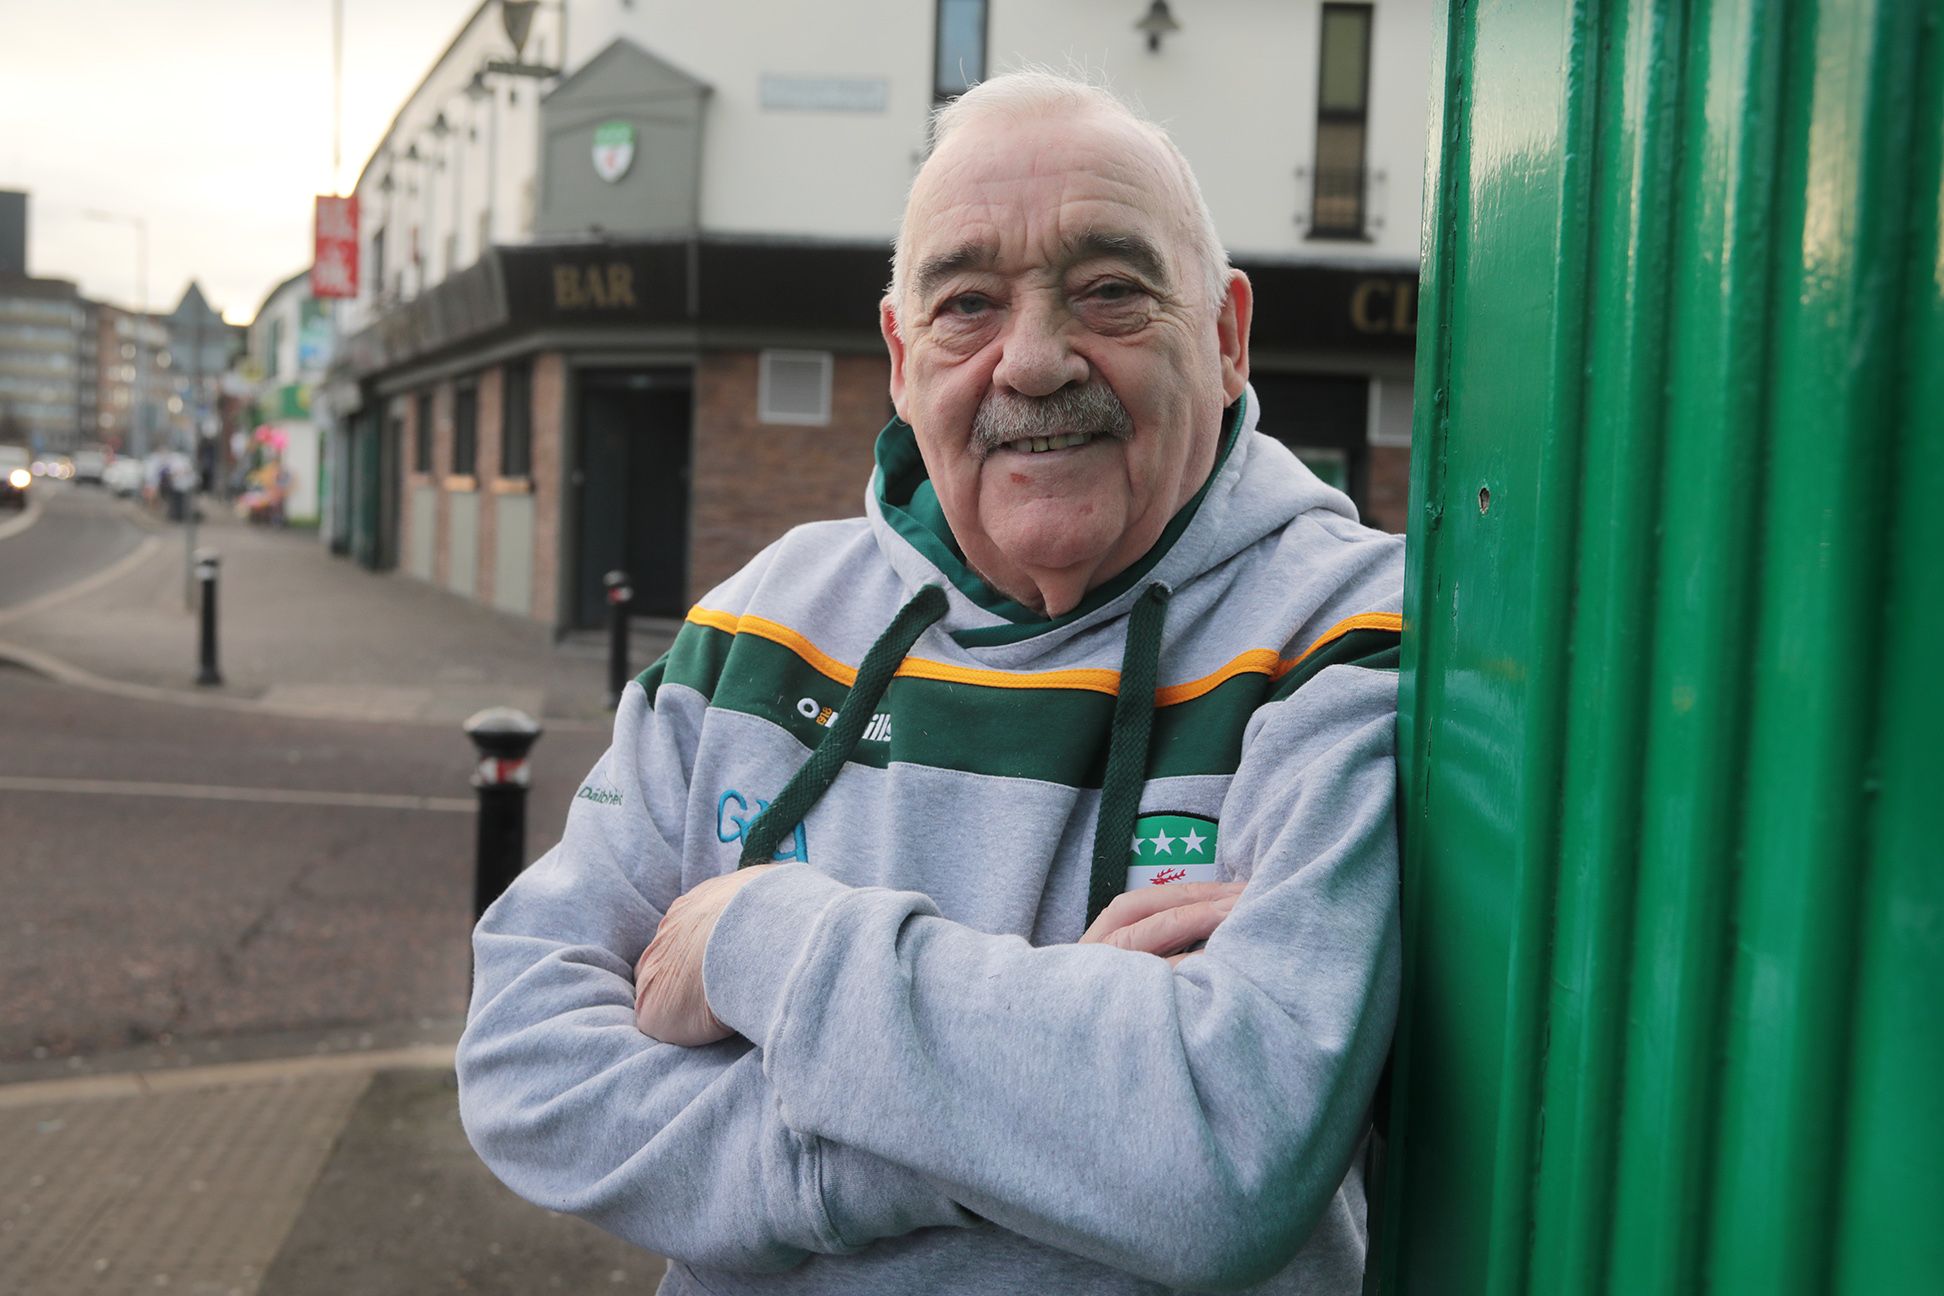 PLANS: Tommy Shaw, Chairperson of Davitt\'s GAC outside the clubhouse on the Falls Road. The new funding will build a sports hall, museum and heritage trail for Beechmount